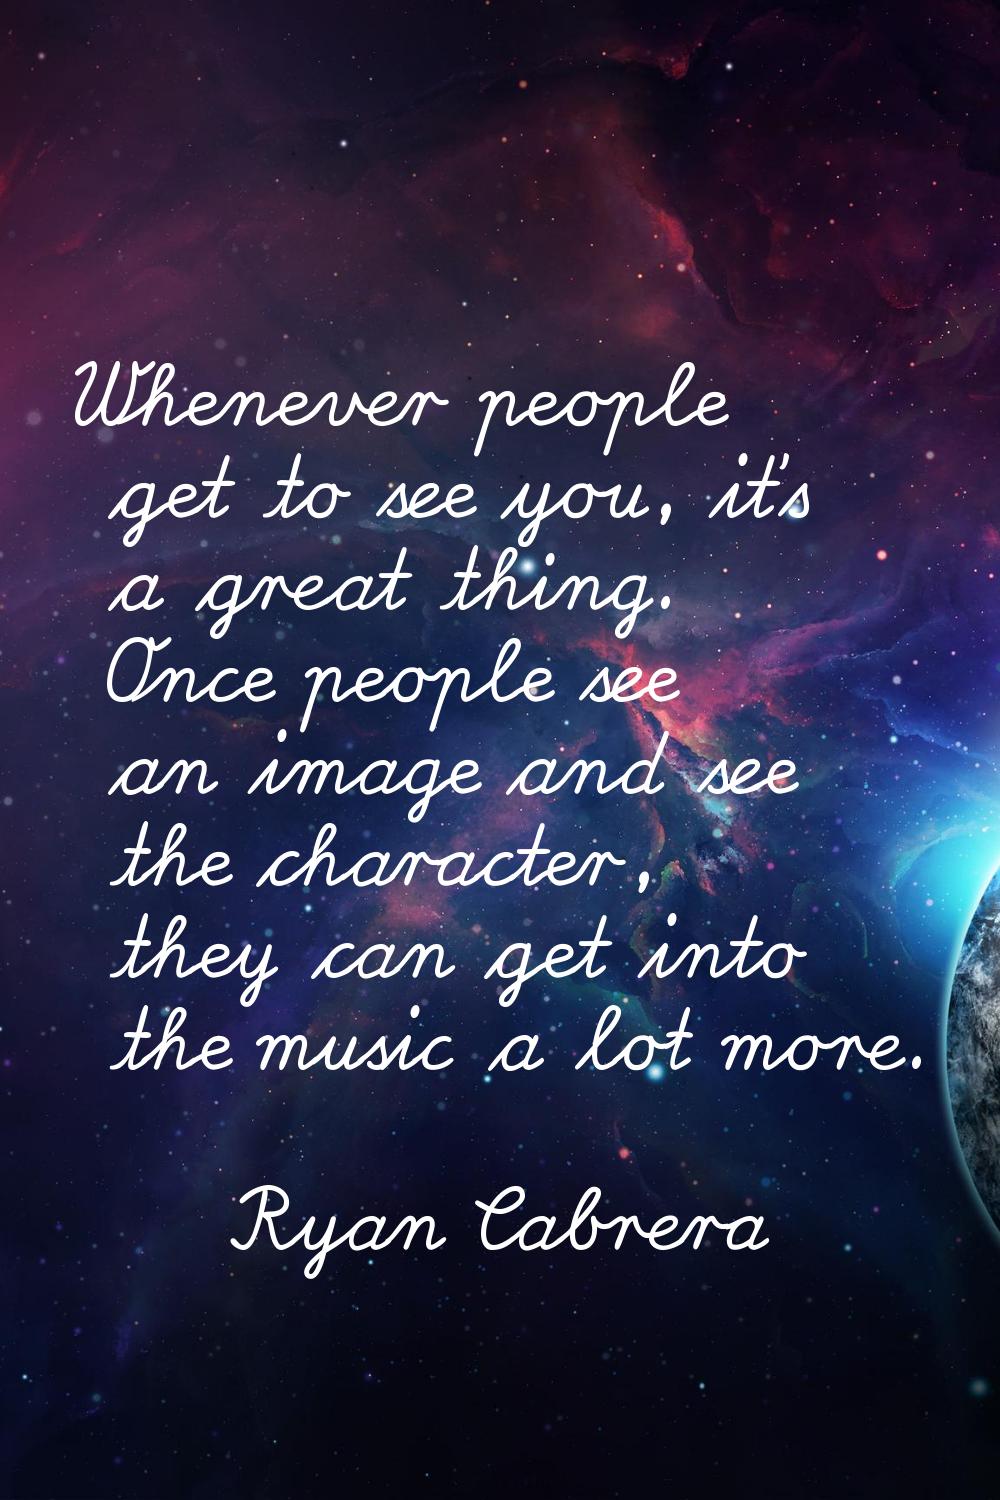 Whenever people get to see you, it's a great thing. Once people see an image and see the character,